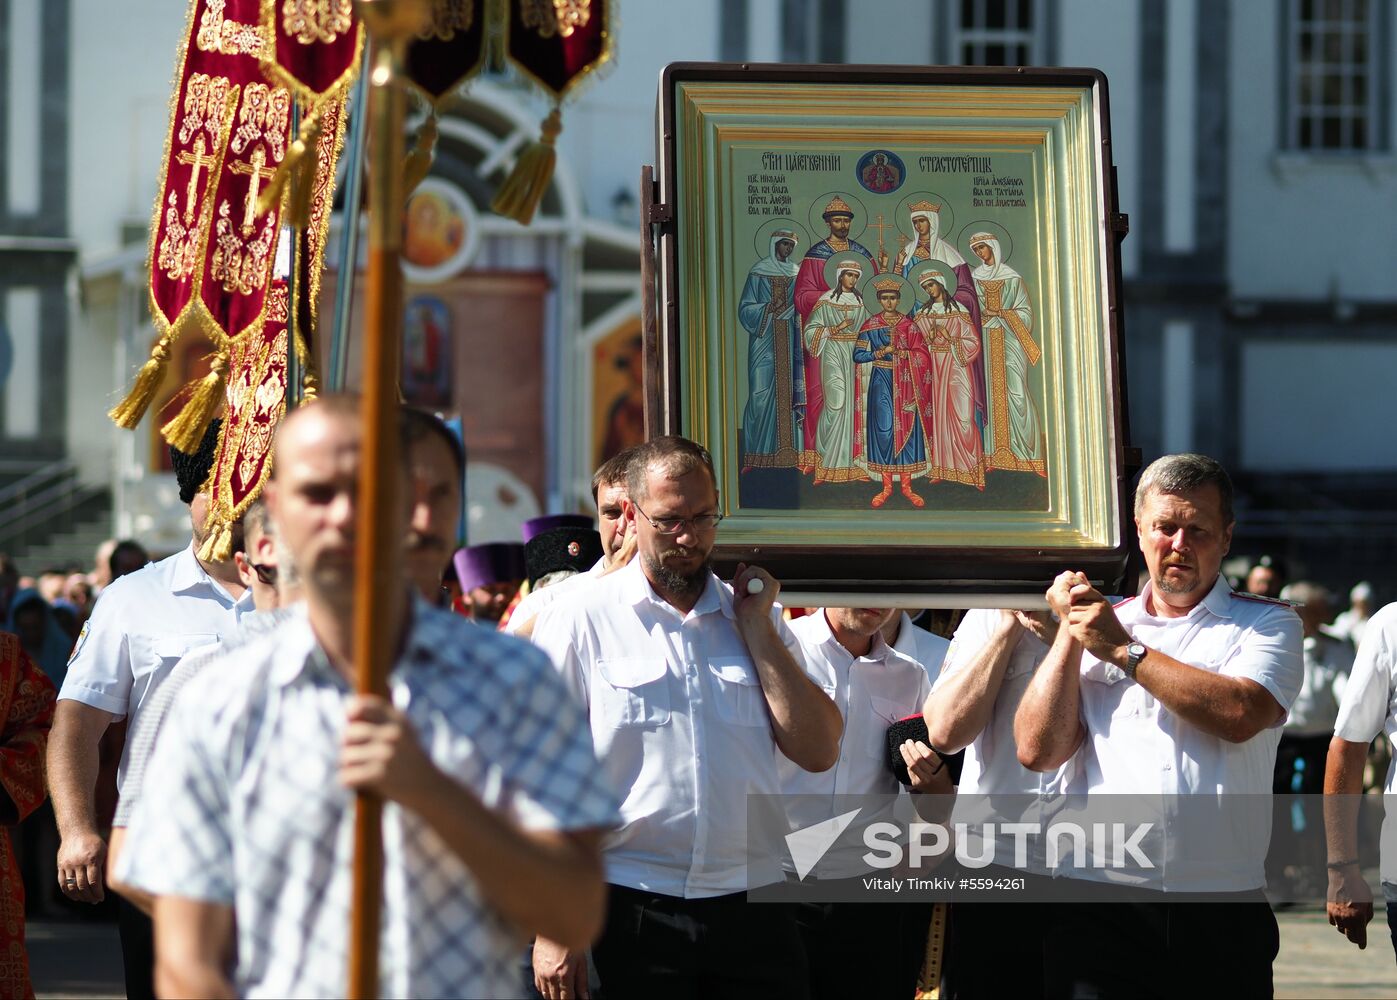 Cross procession in memory of Royal Passion-Bearers